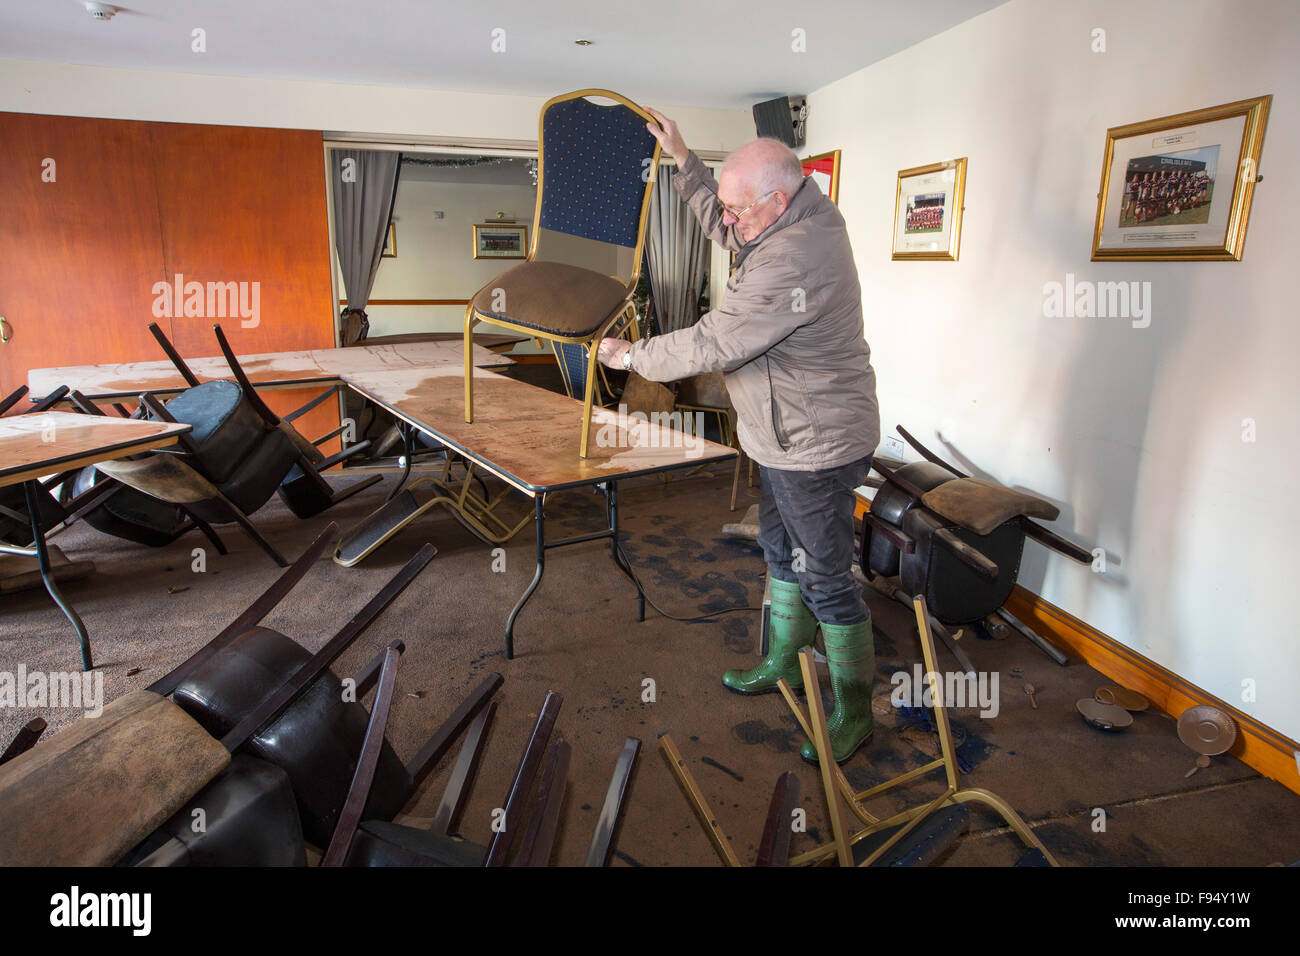 Carlisle Rugby Clubs, club house submerged by flood waters off Warwick Road in Carlisle, Cumbria on Tuesday 8th December 2015, after torrential rain from storm Desmond. The storm set a new British record for rainfall totals in a day with 341.4mm falling in 24 hours. Stock Photo